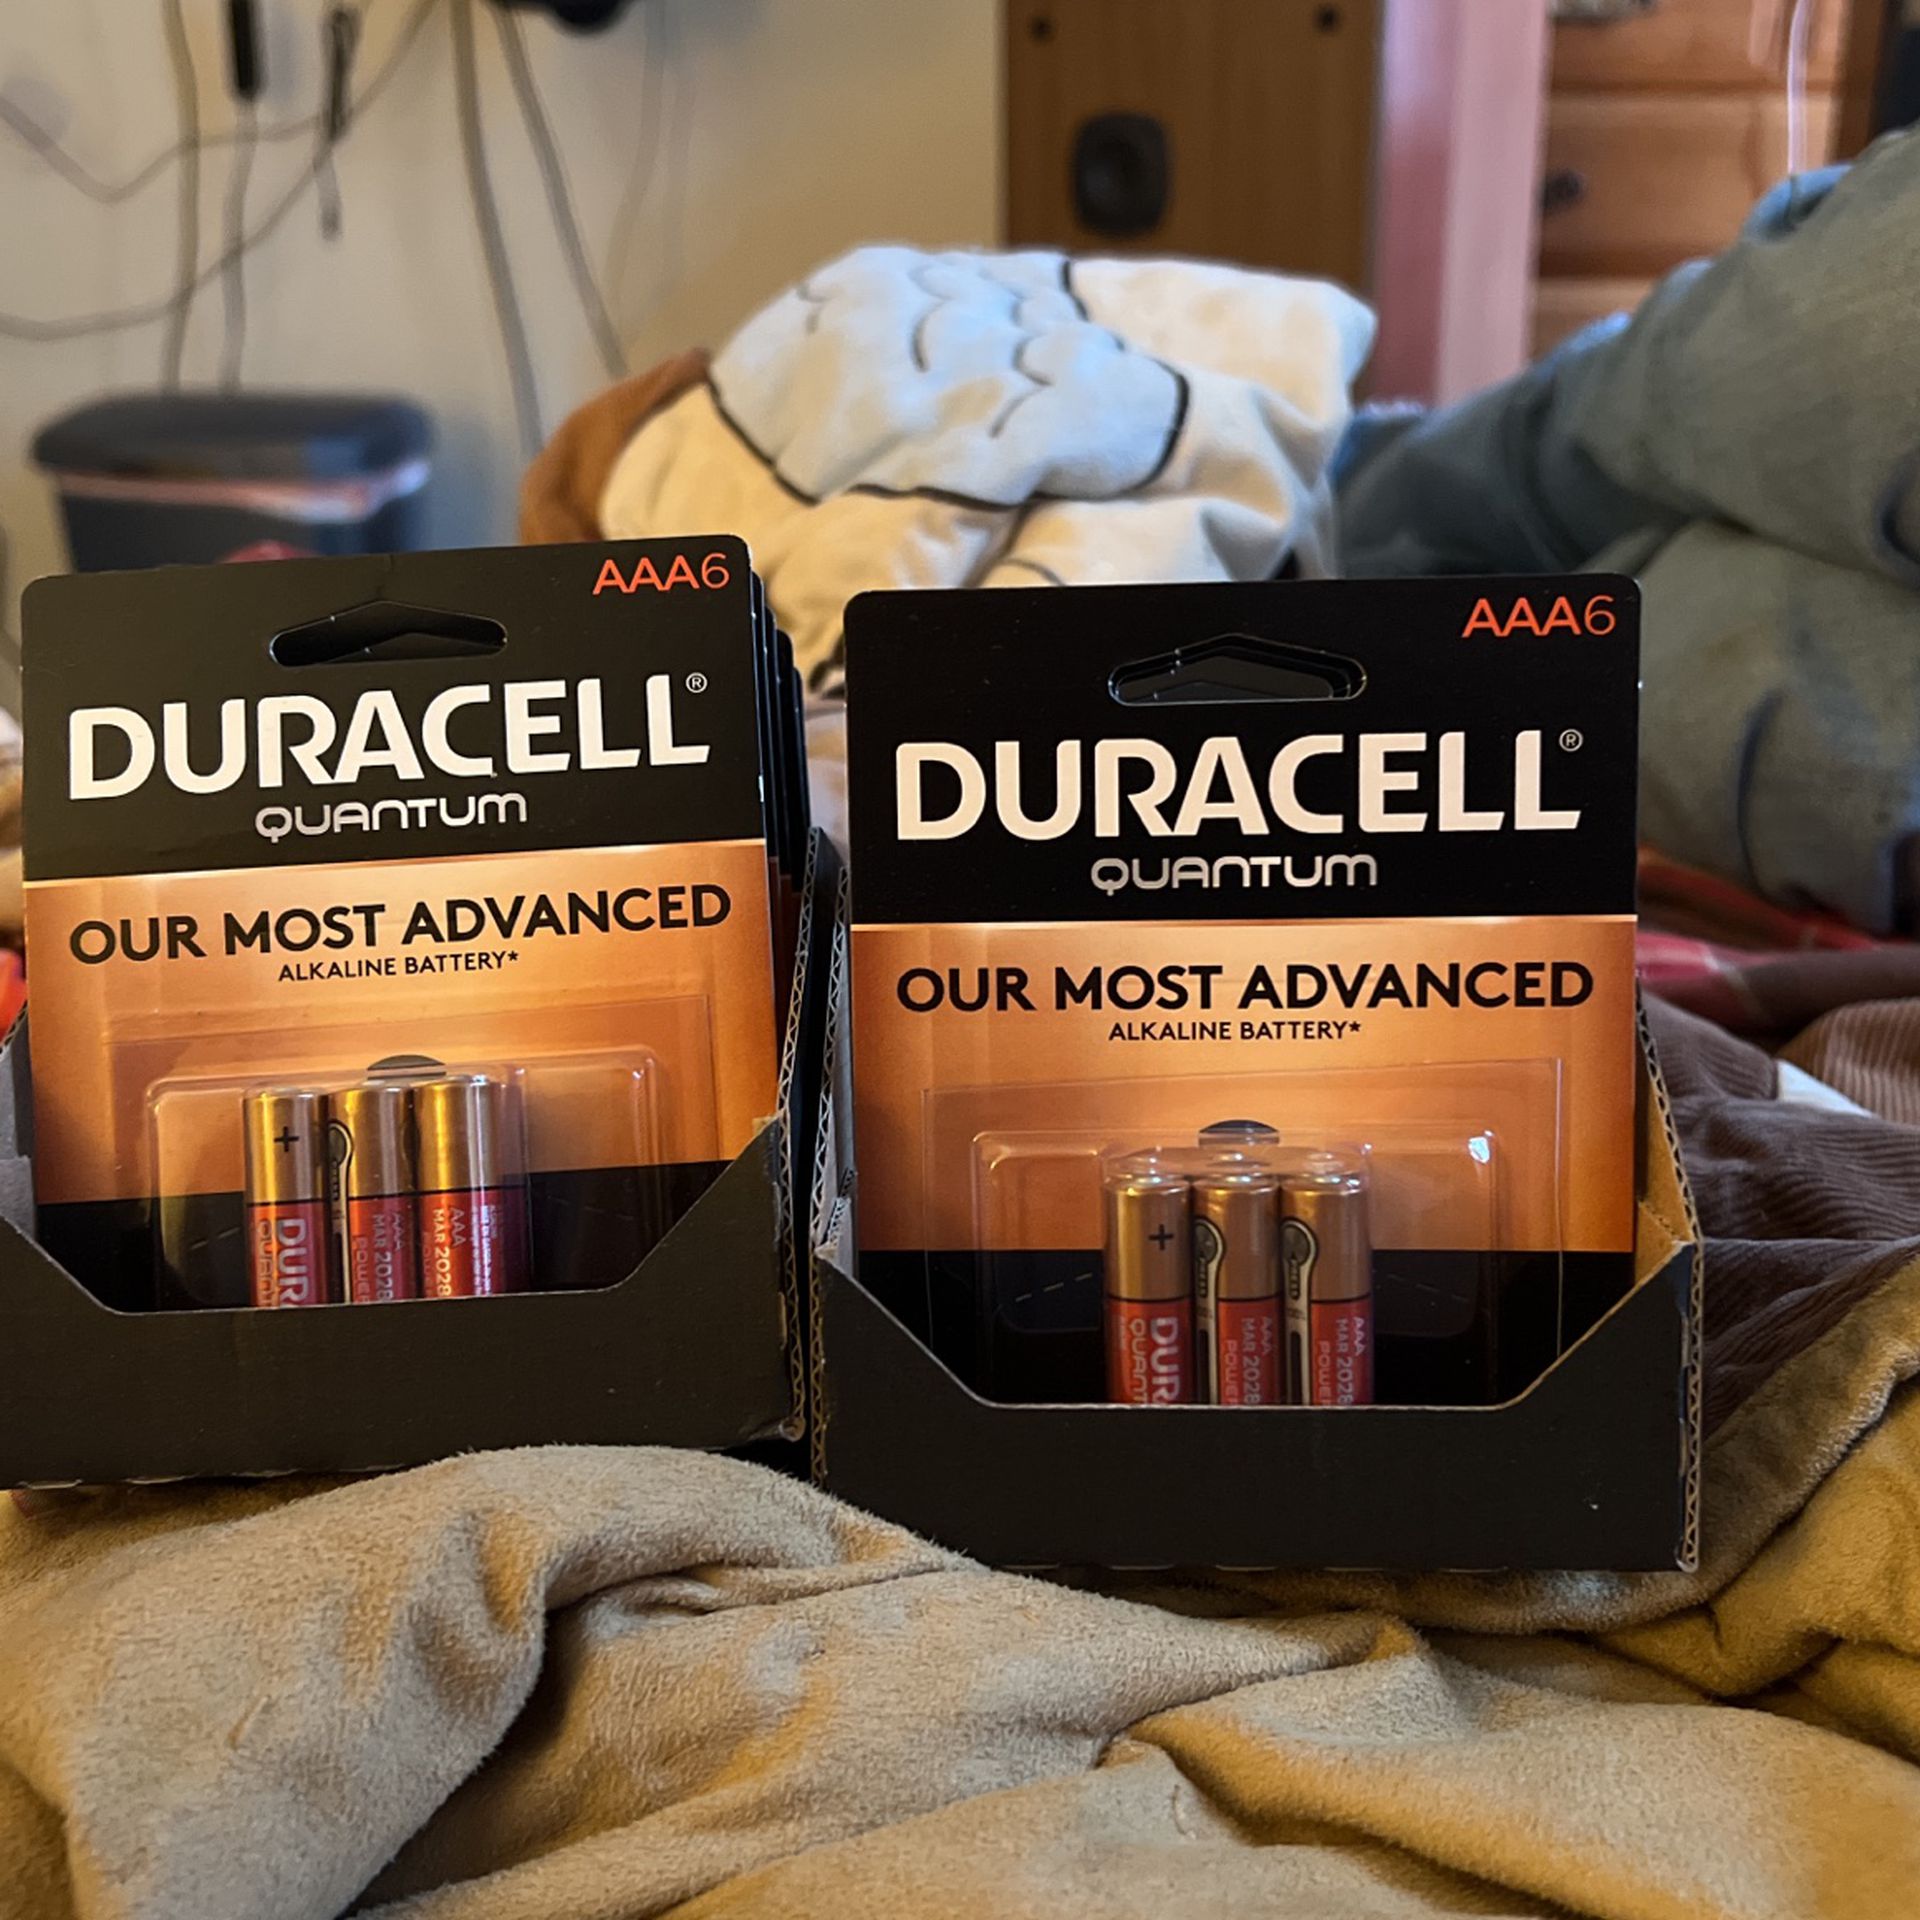 60 AAA Duracell Quantum Battery’s 